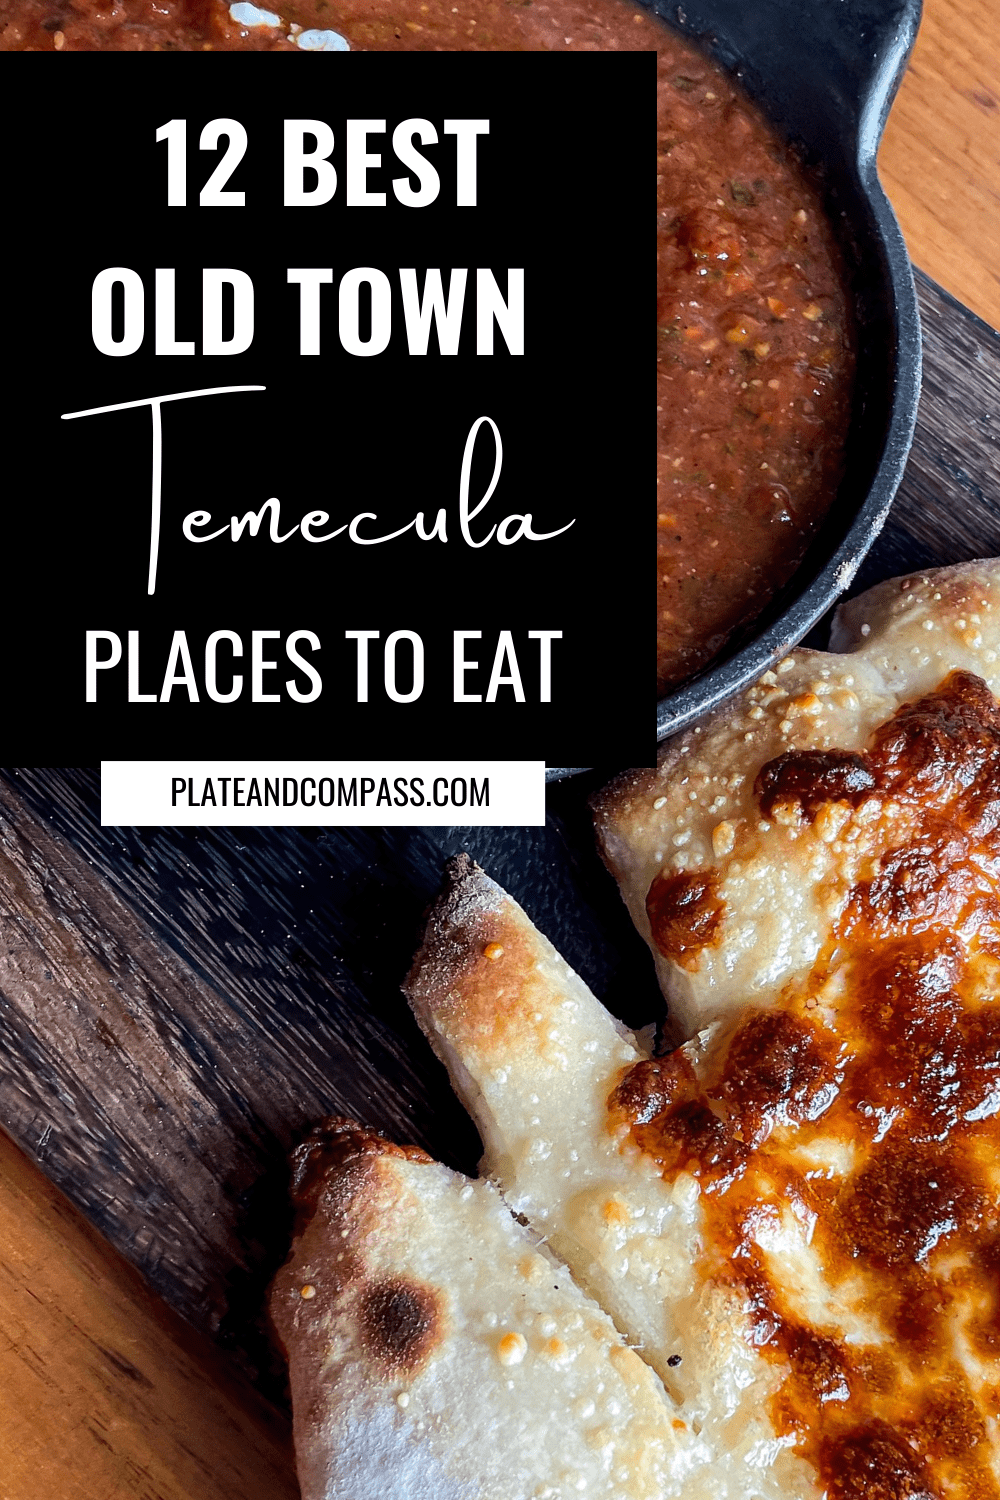 Best Old Town Temecula Places to Eat